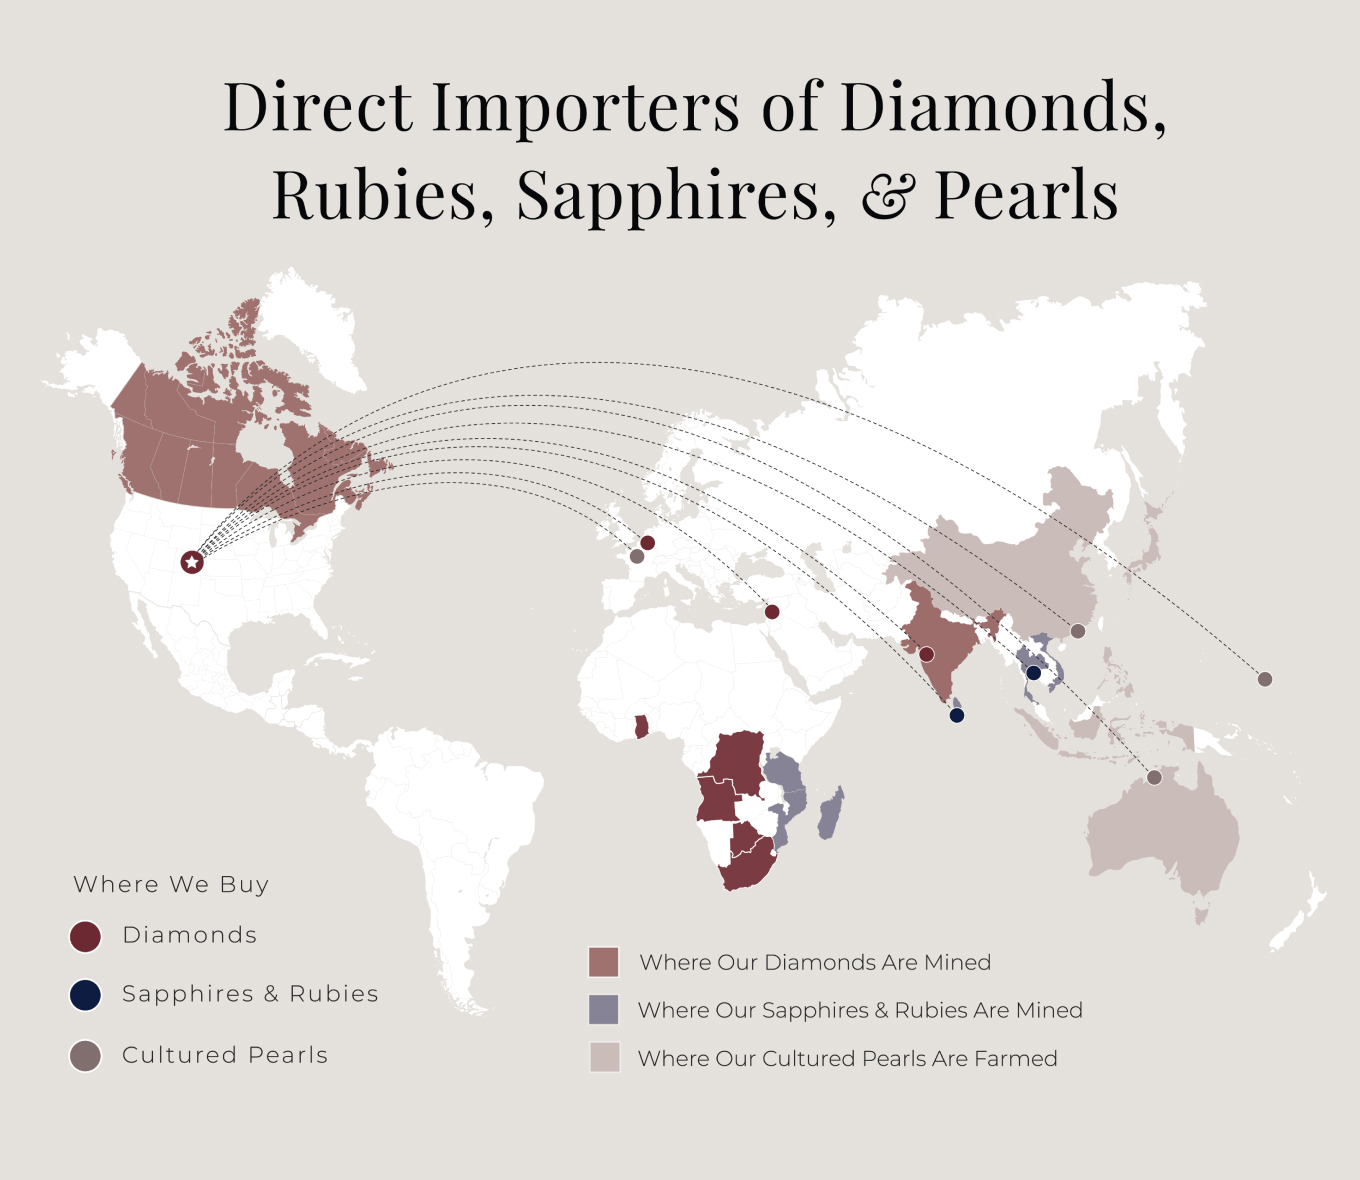 image showing Shane Co.'s direct sourcing of diamonds, rubies, sapphires and pearls. Directly diamond and gemstone importer